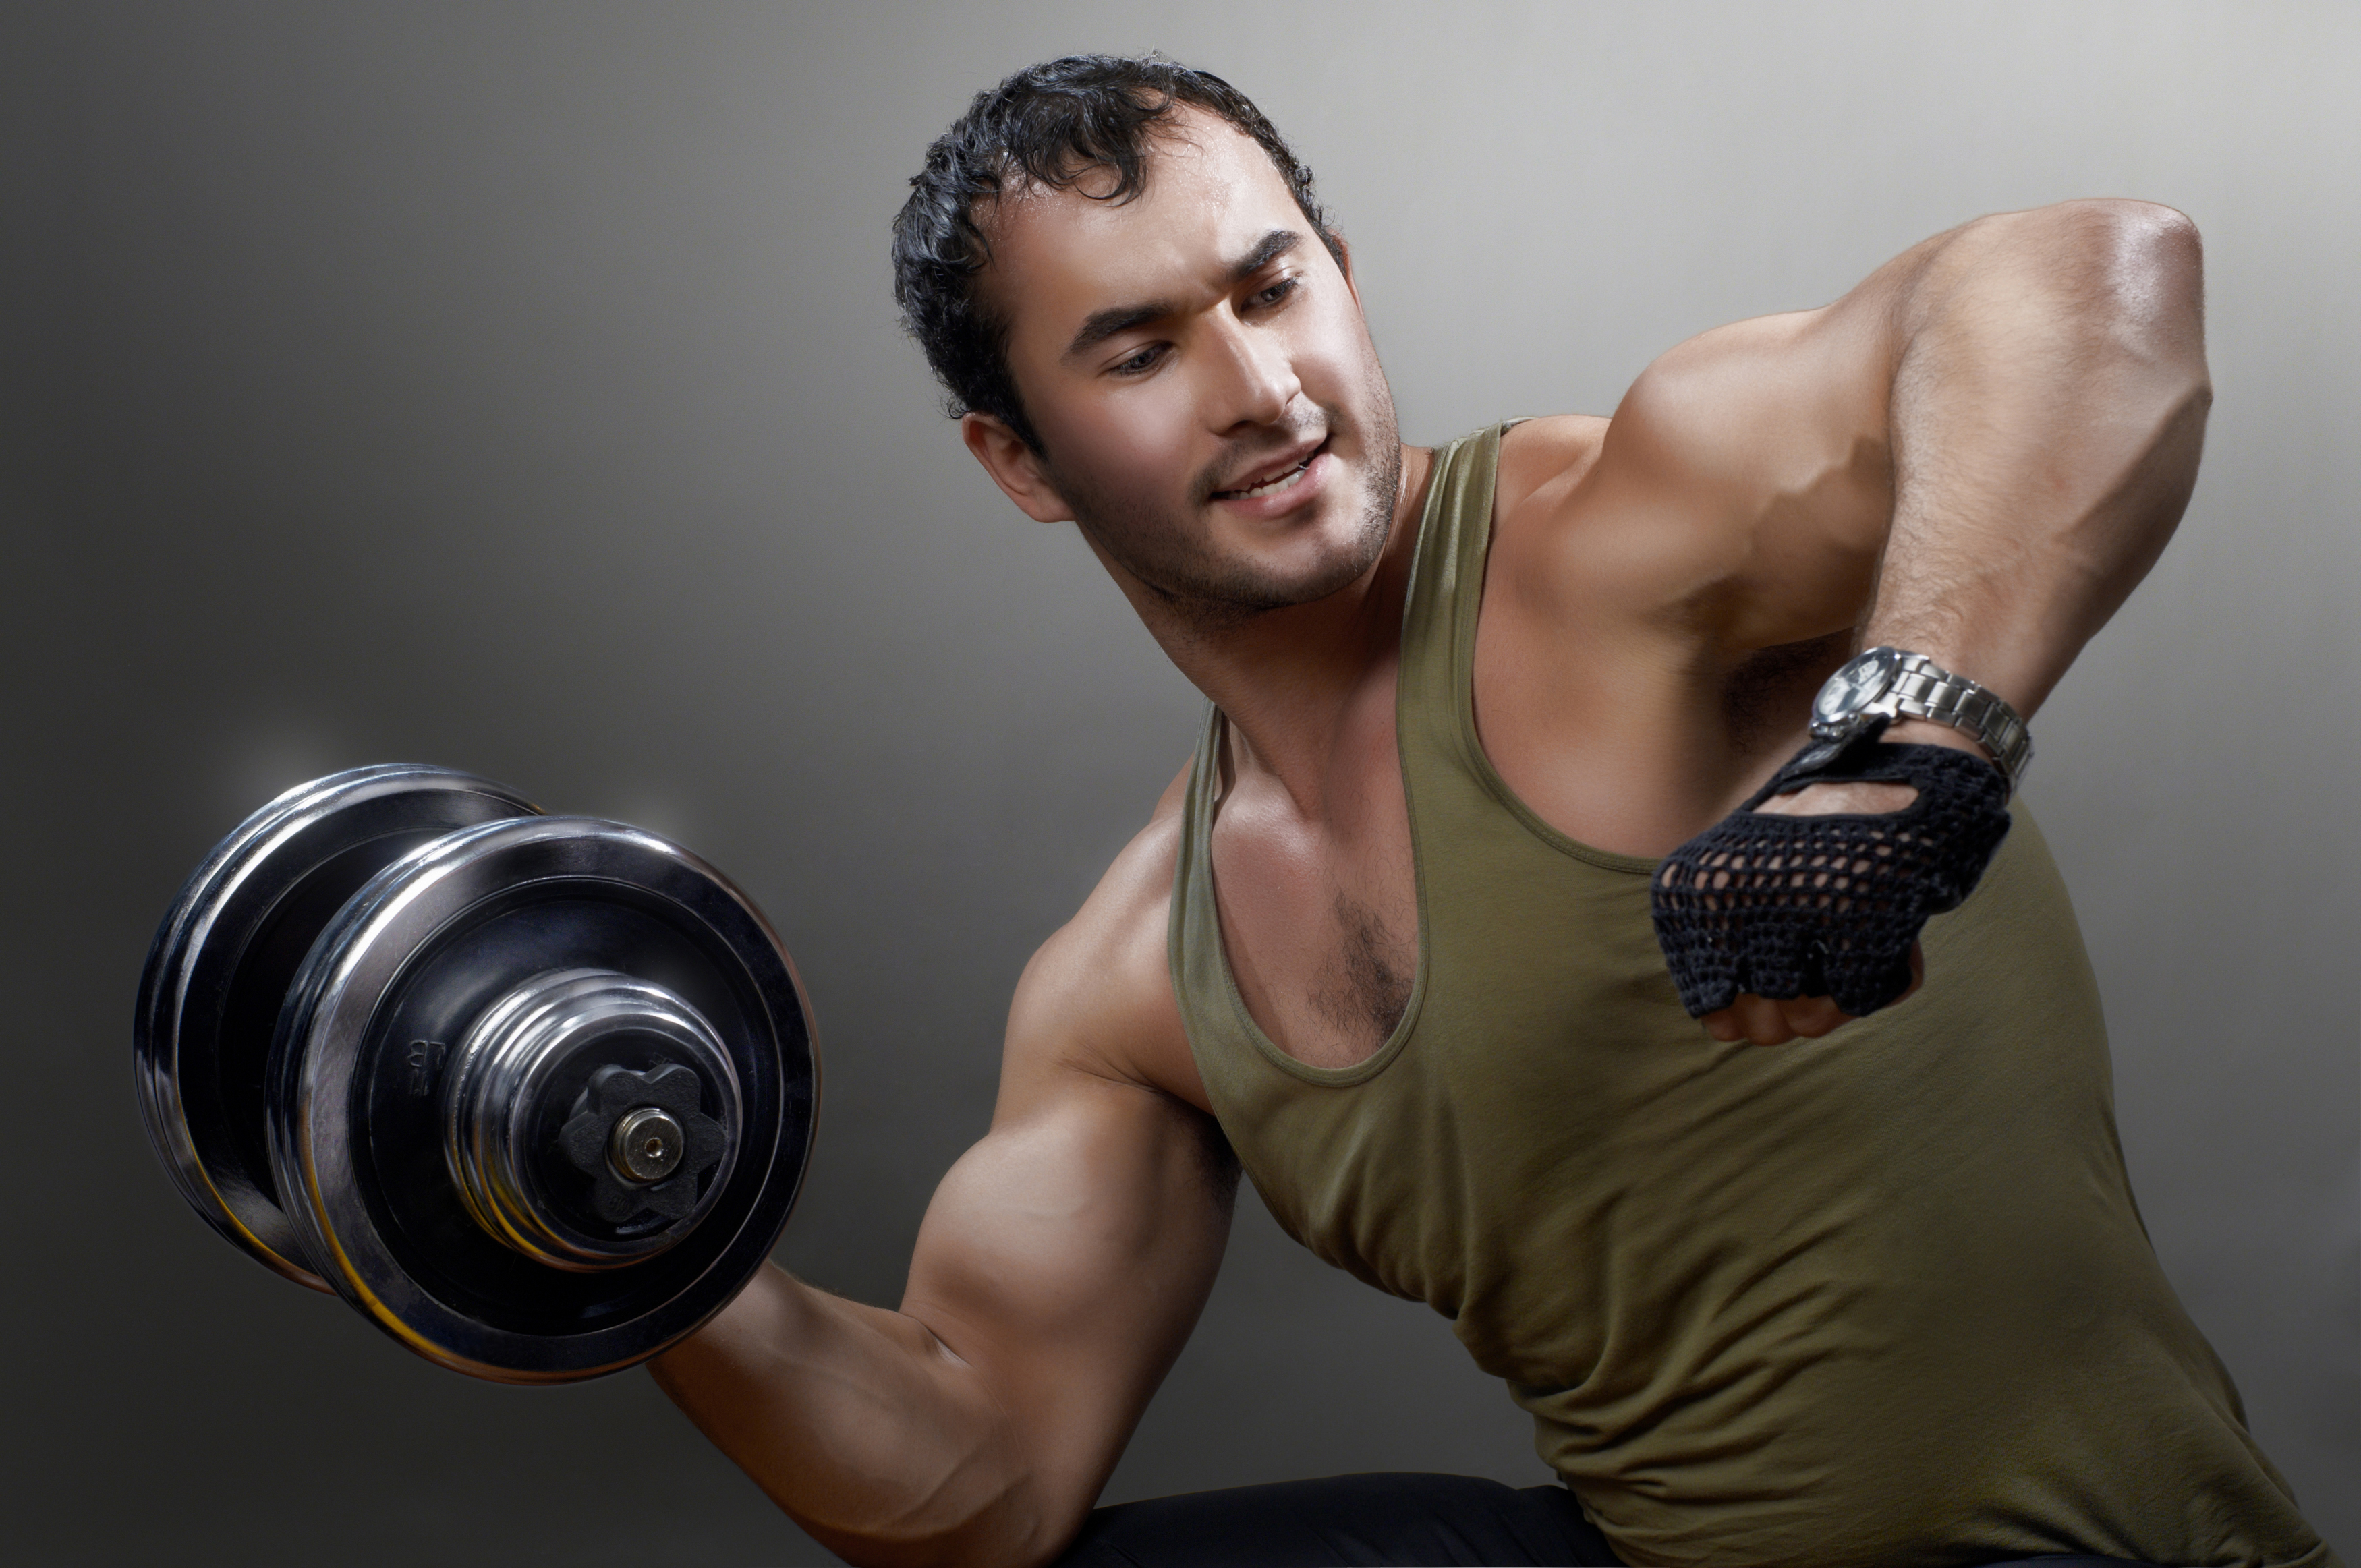 Man Biceps Wallpapers High Quality | Download Free